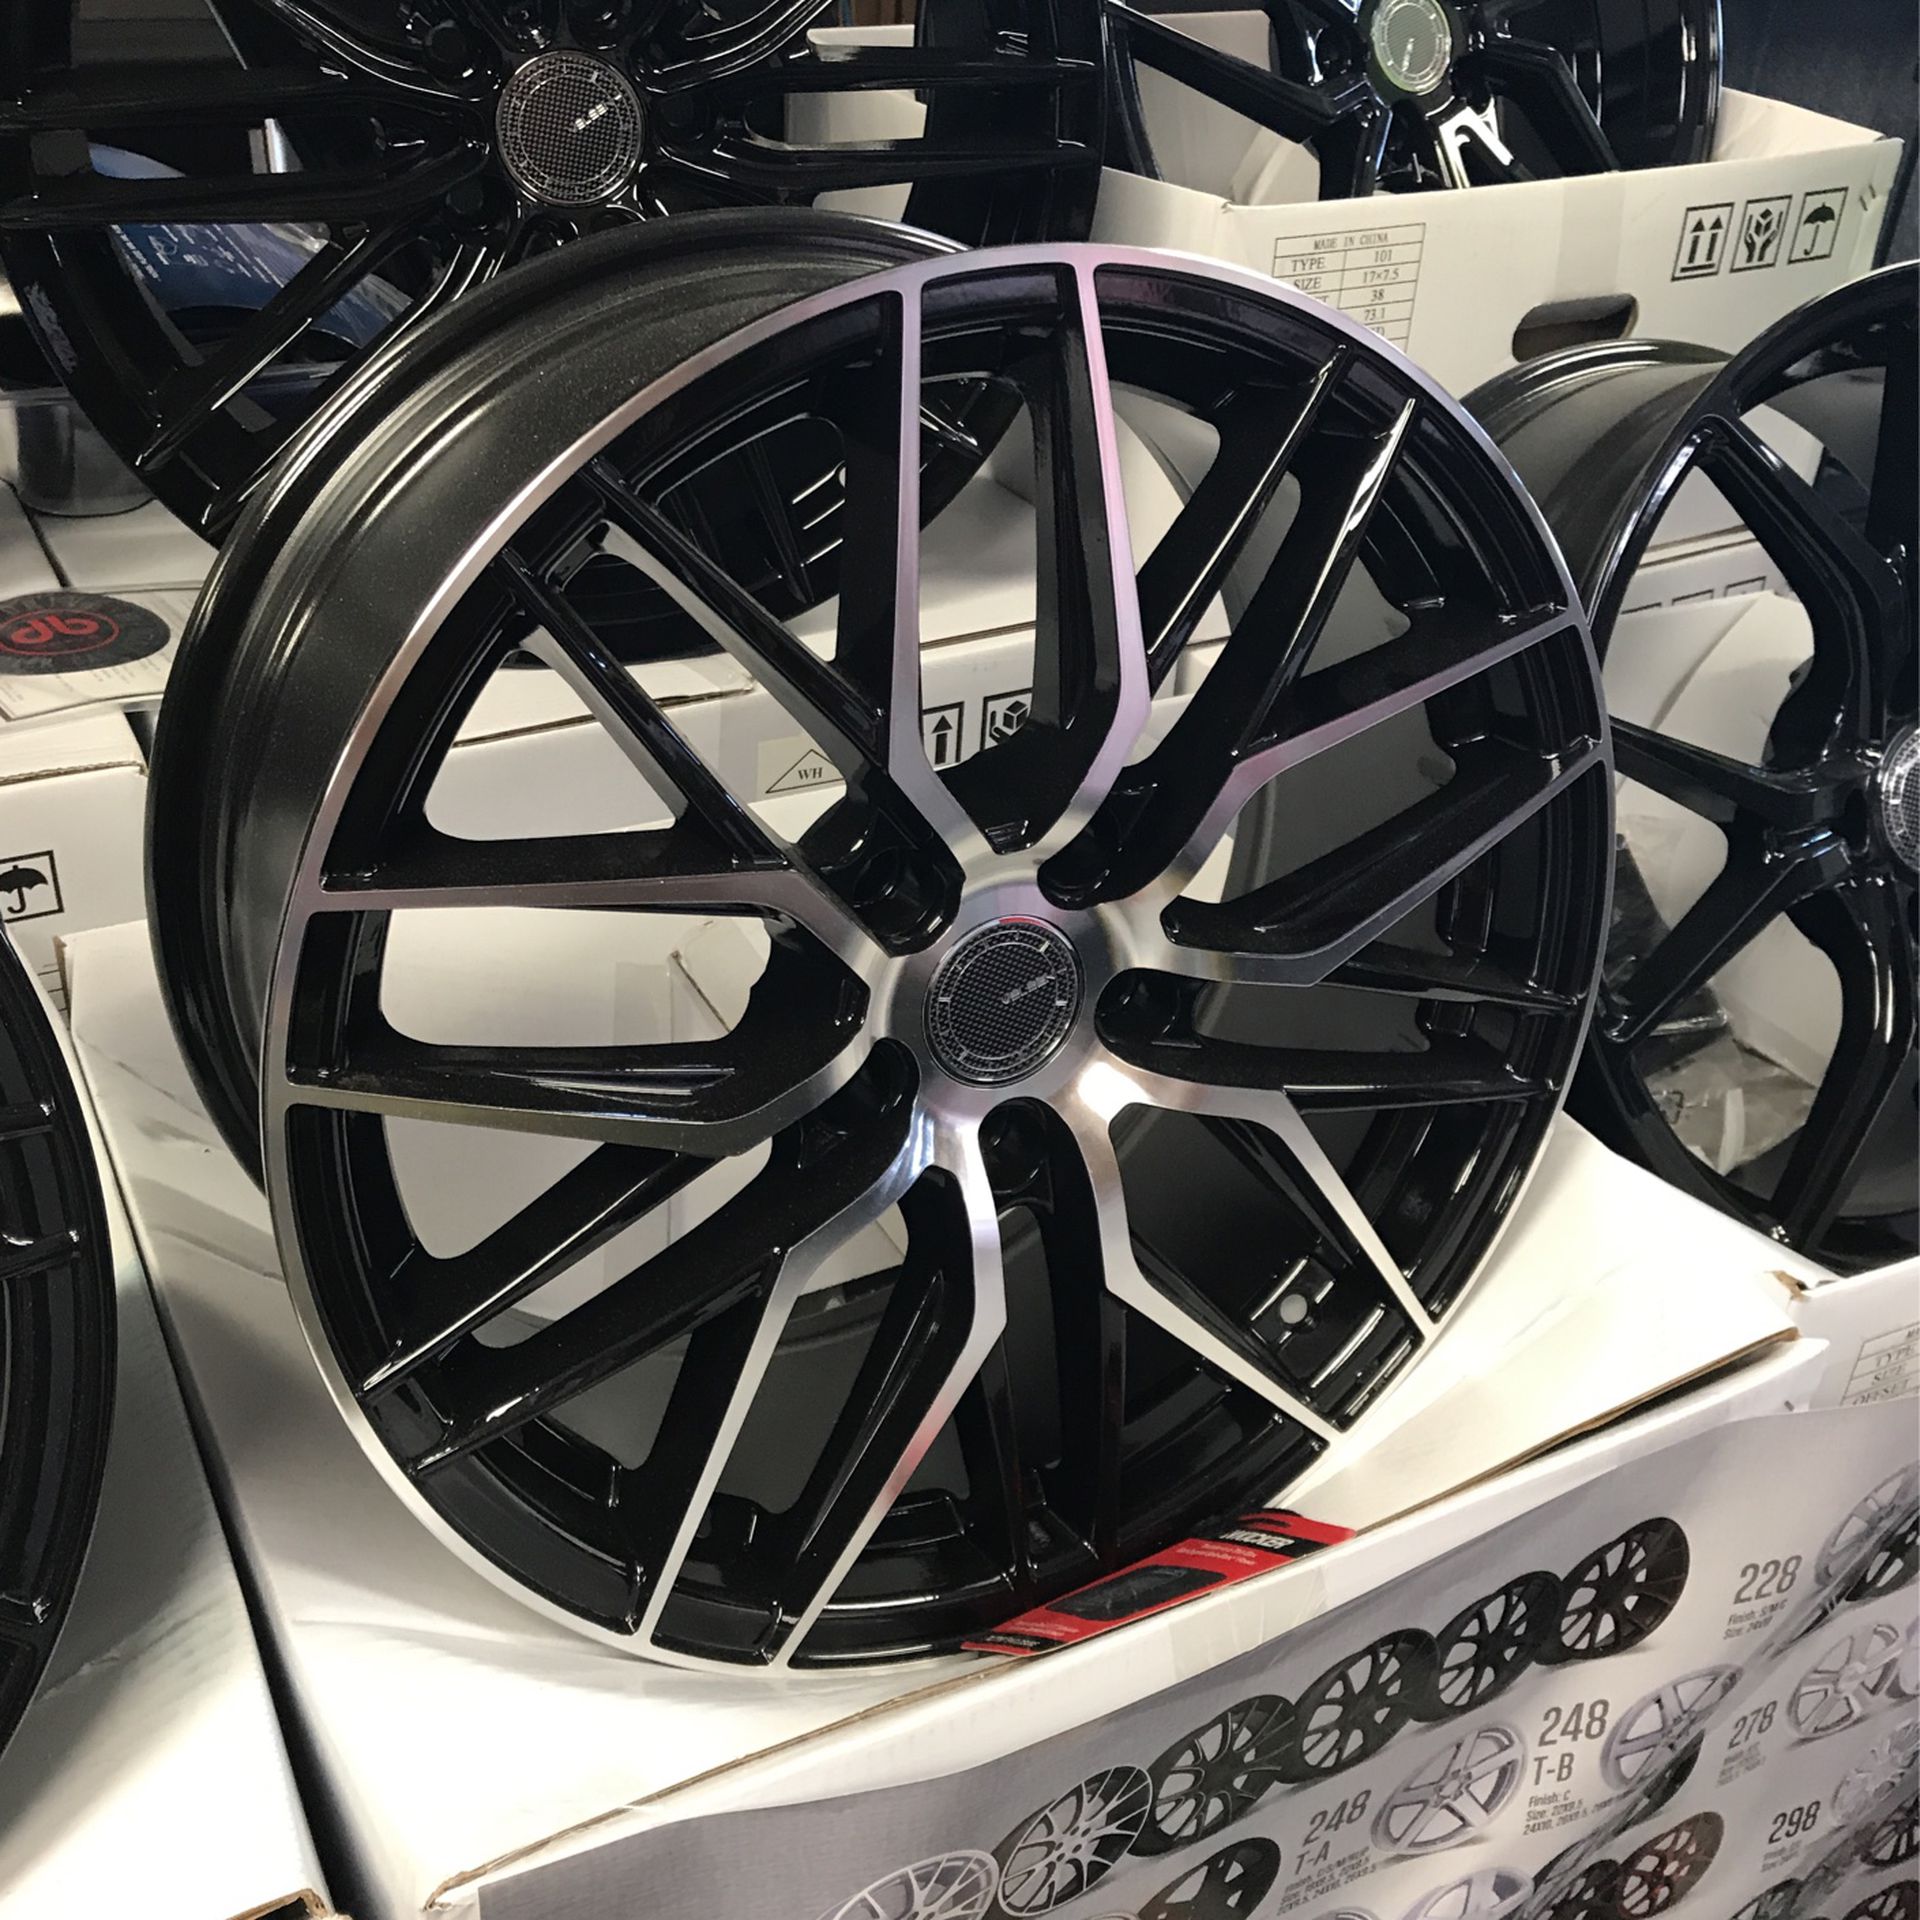 Velsen 17 Inch Wheels On Sale Today for 599 